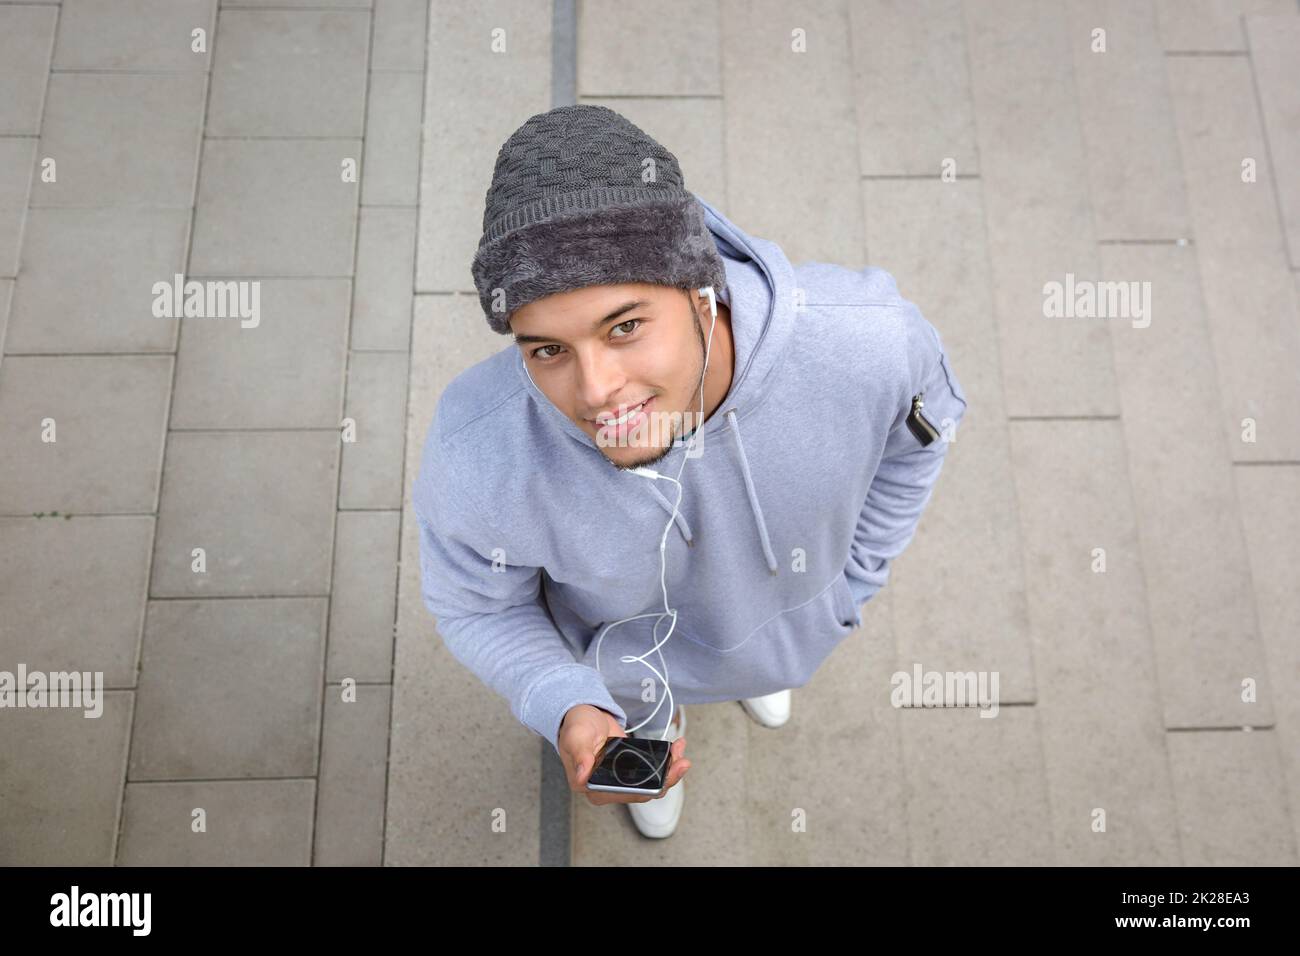 Listening to music smiling young latin man looking into camera runner sports training from above Stock Photo